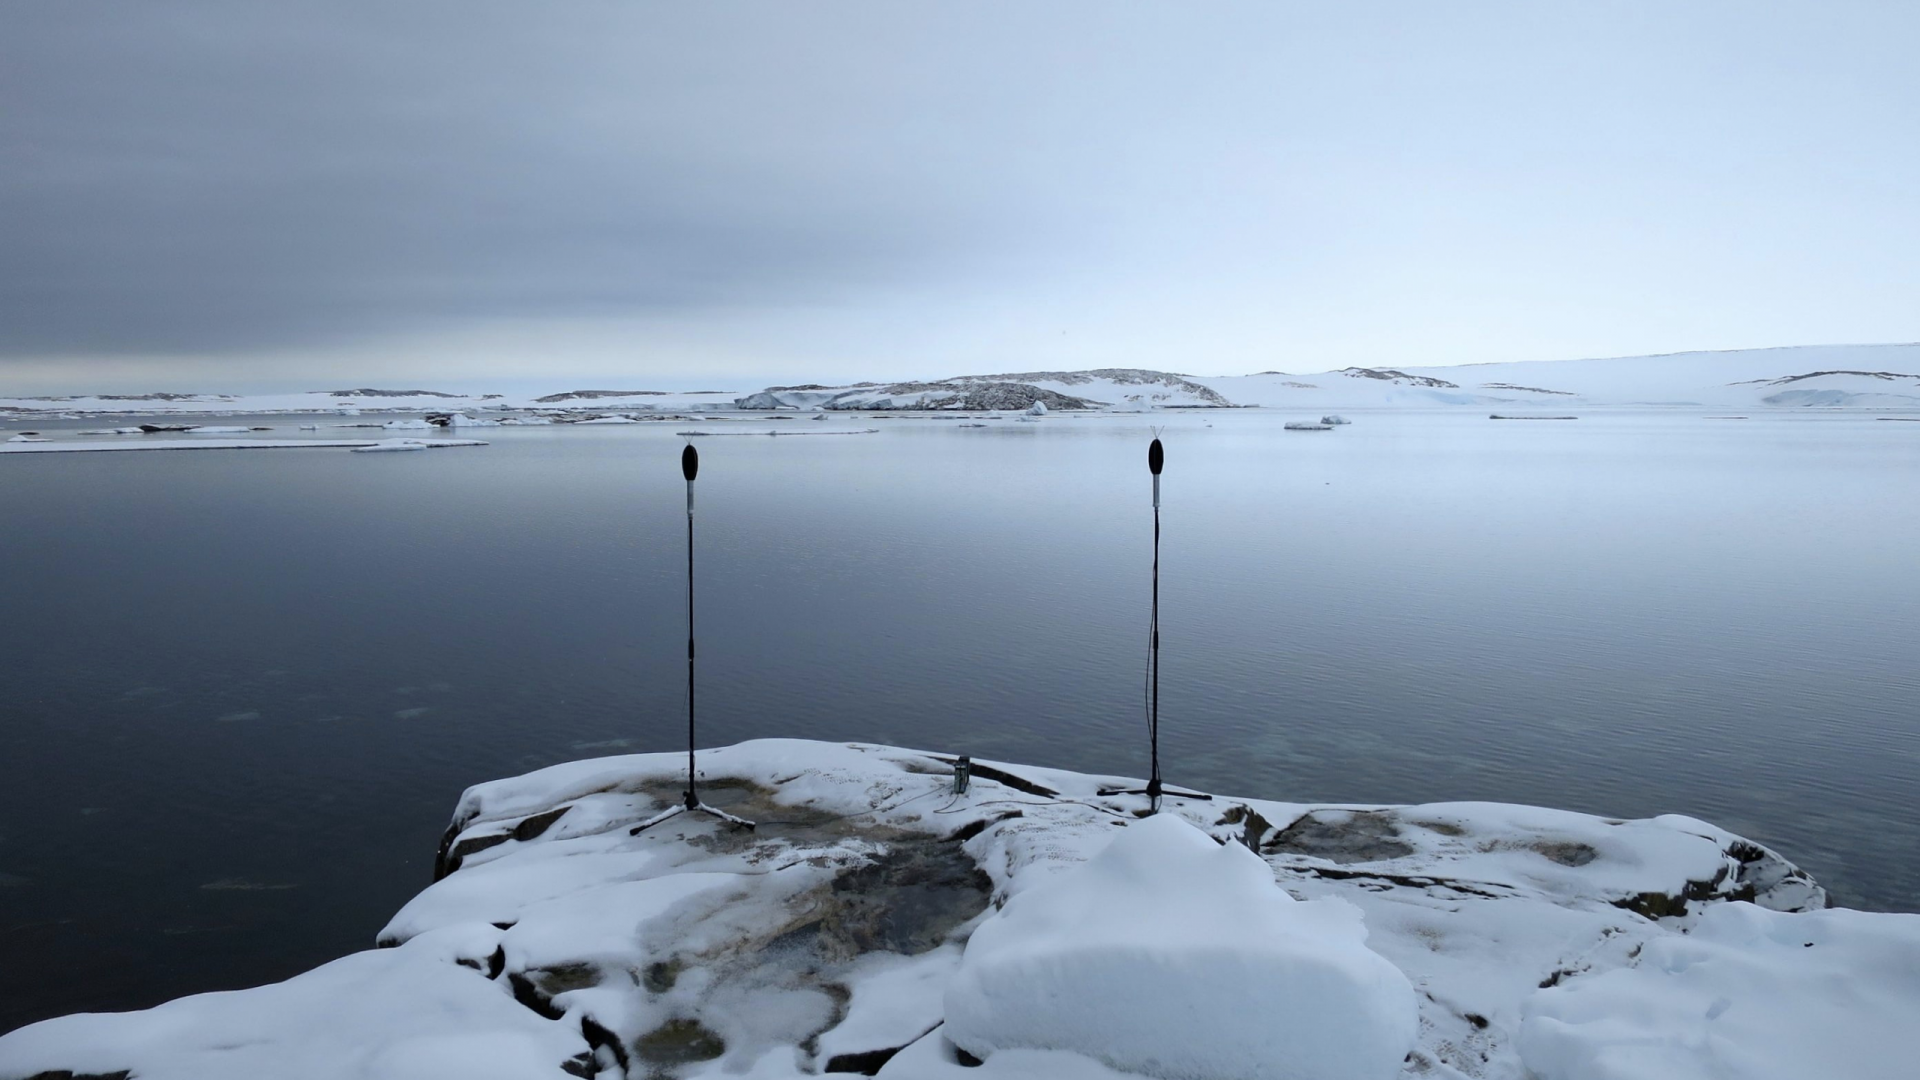 2 microphones on tall stands in the snow in front of a large stretch of water